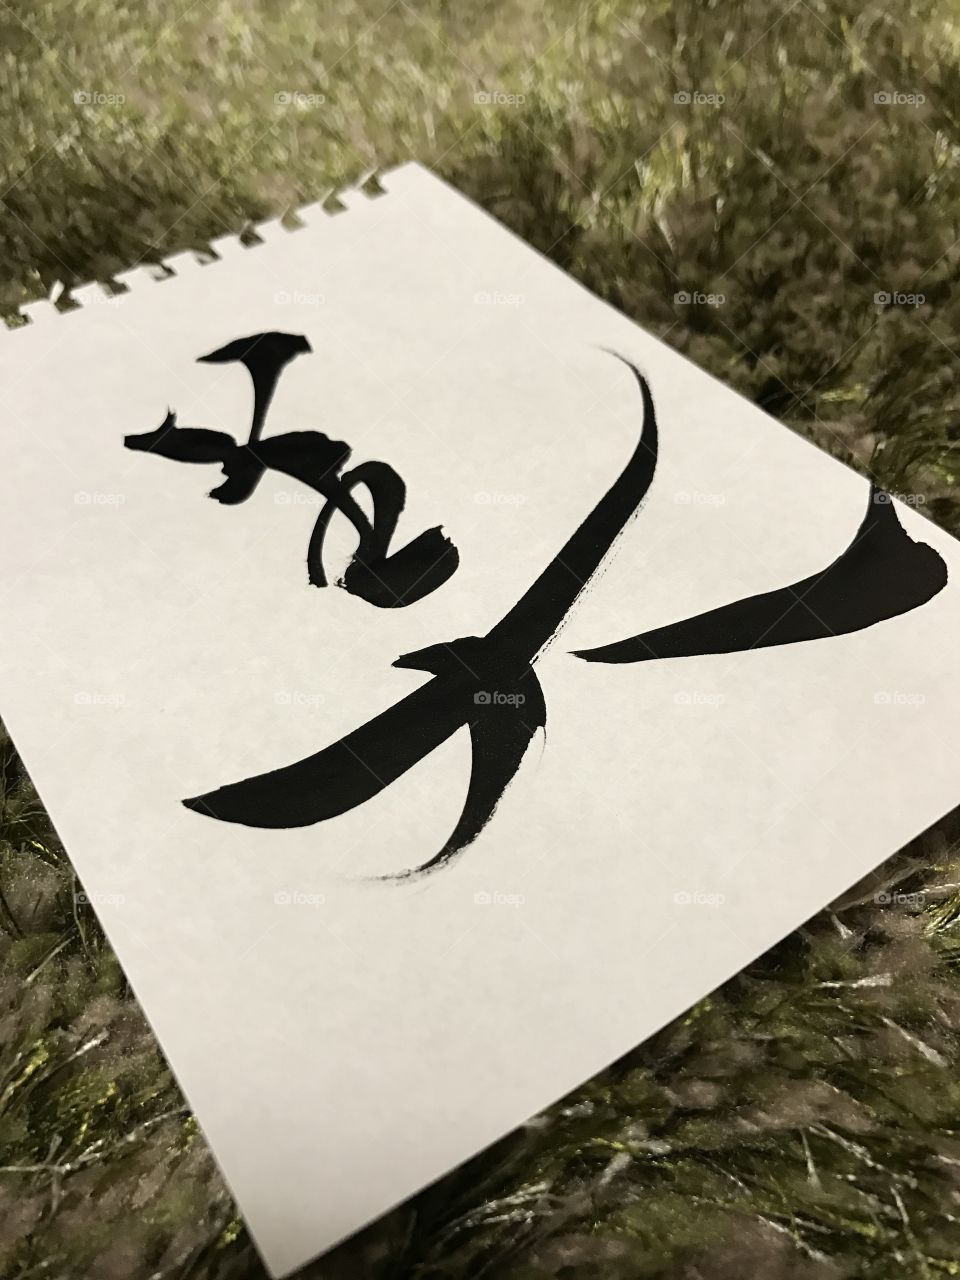 this is kanji character.
it means beautiful

